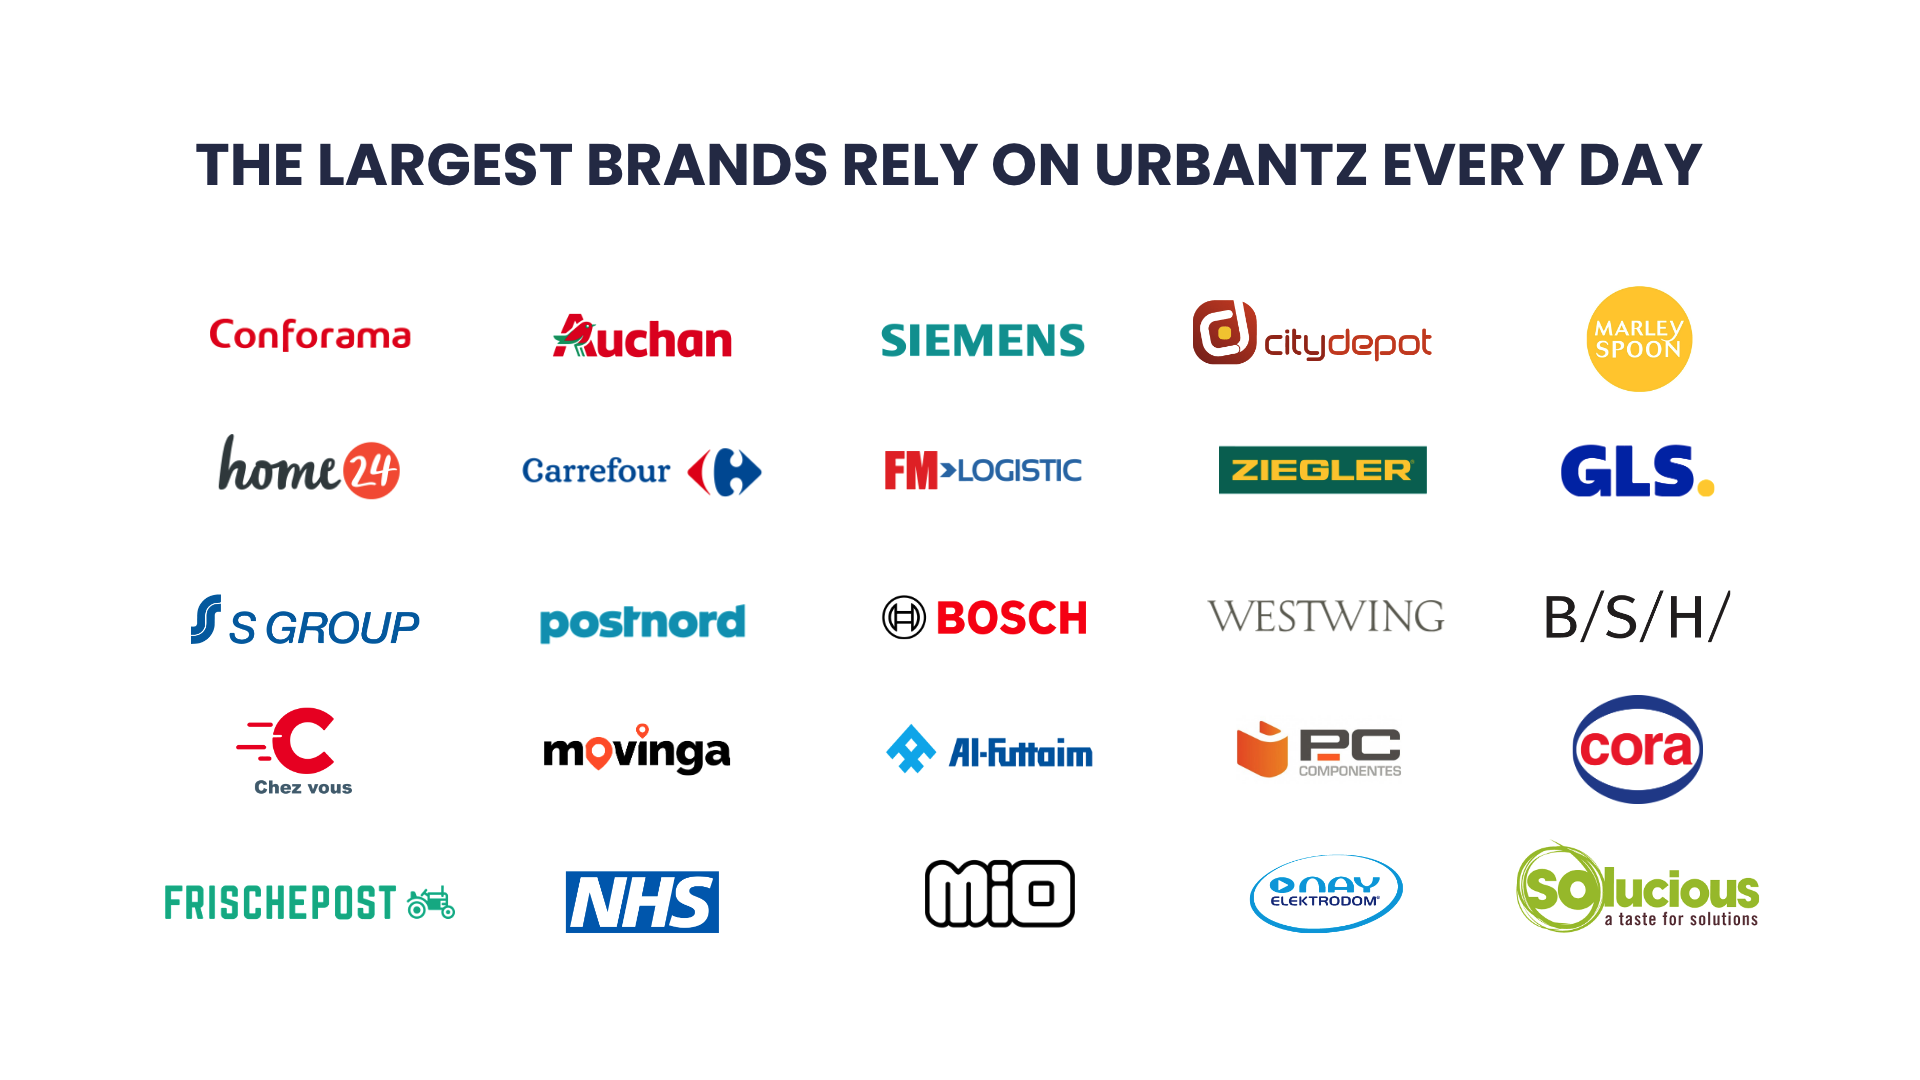 JOIN THE BIGGEST BRANDS RELYING ON URBANTZ EVERY DAY